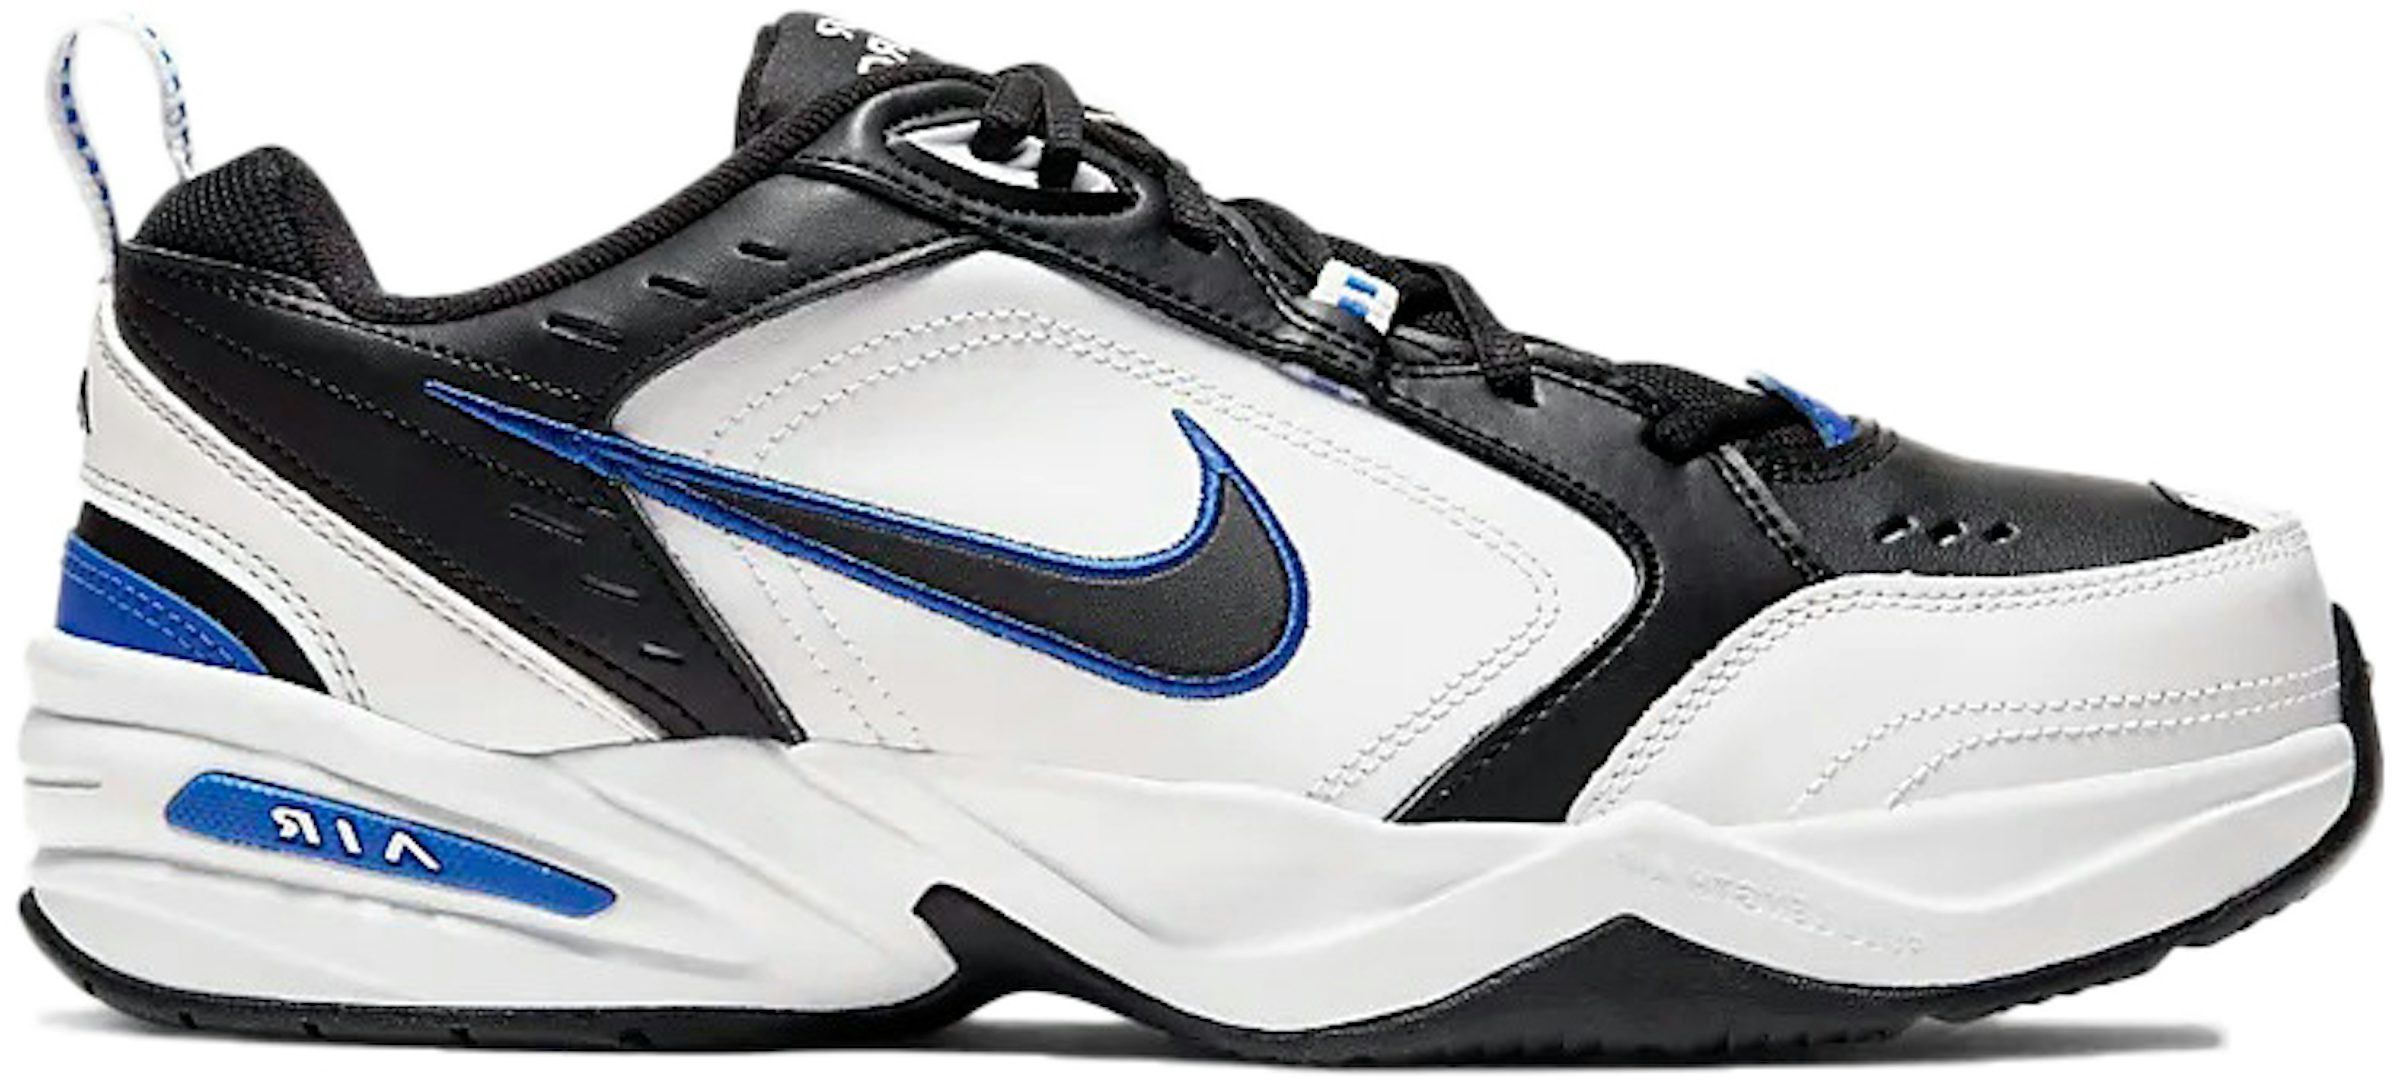 straal Concentratie Rot Nike Air Monarch IV Black White Royal Blue Men's - 415445-002 - US